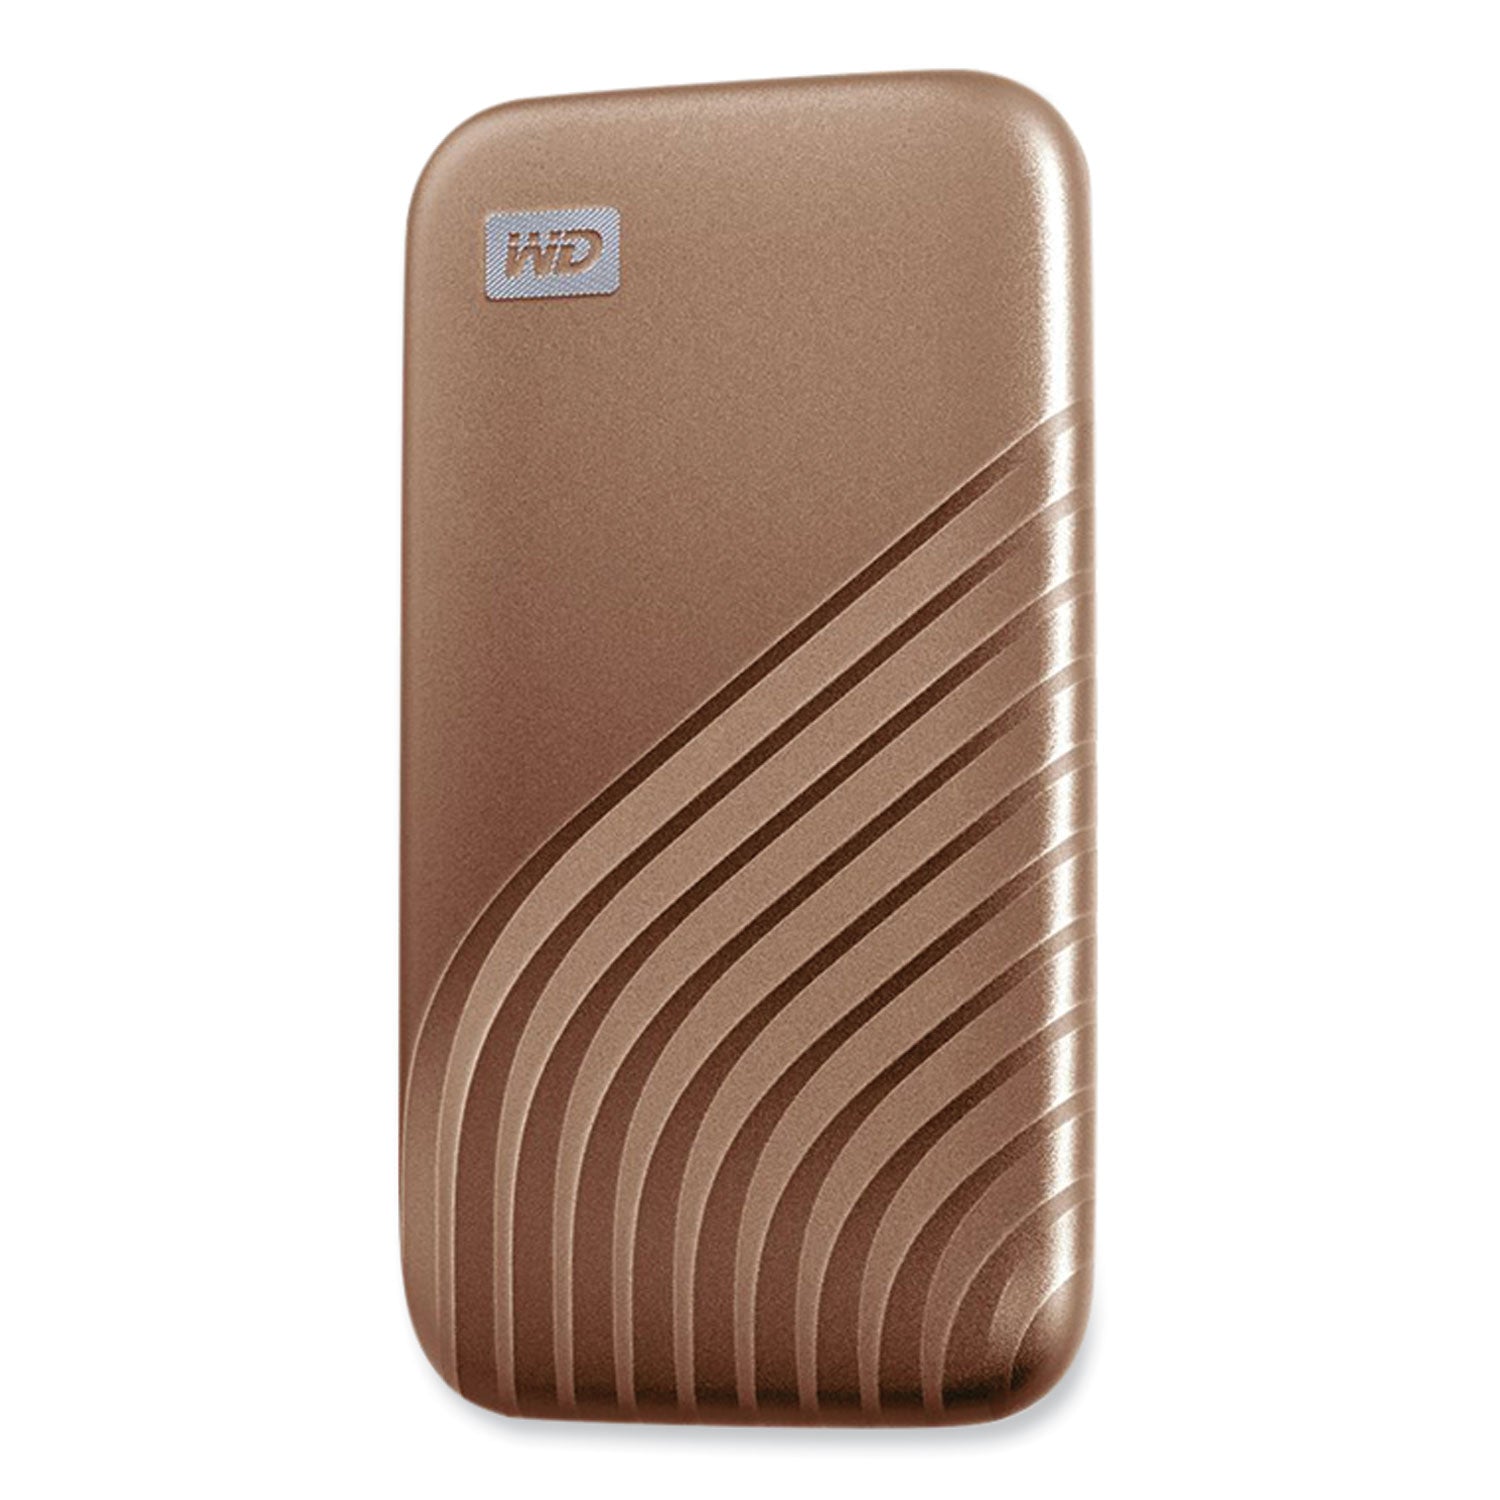 my-passport-external-solid-state-drive-2-tb-usb-32-gold_wdcagf0020bgd - 3